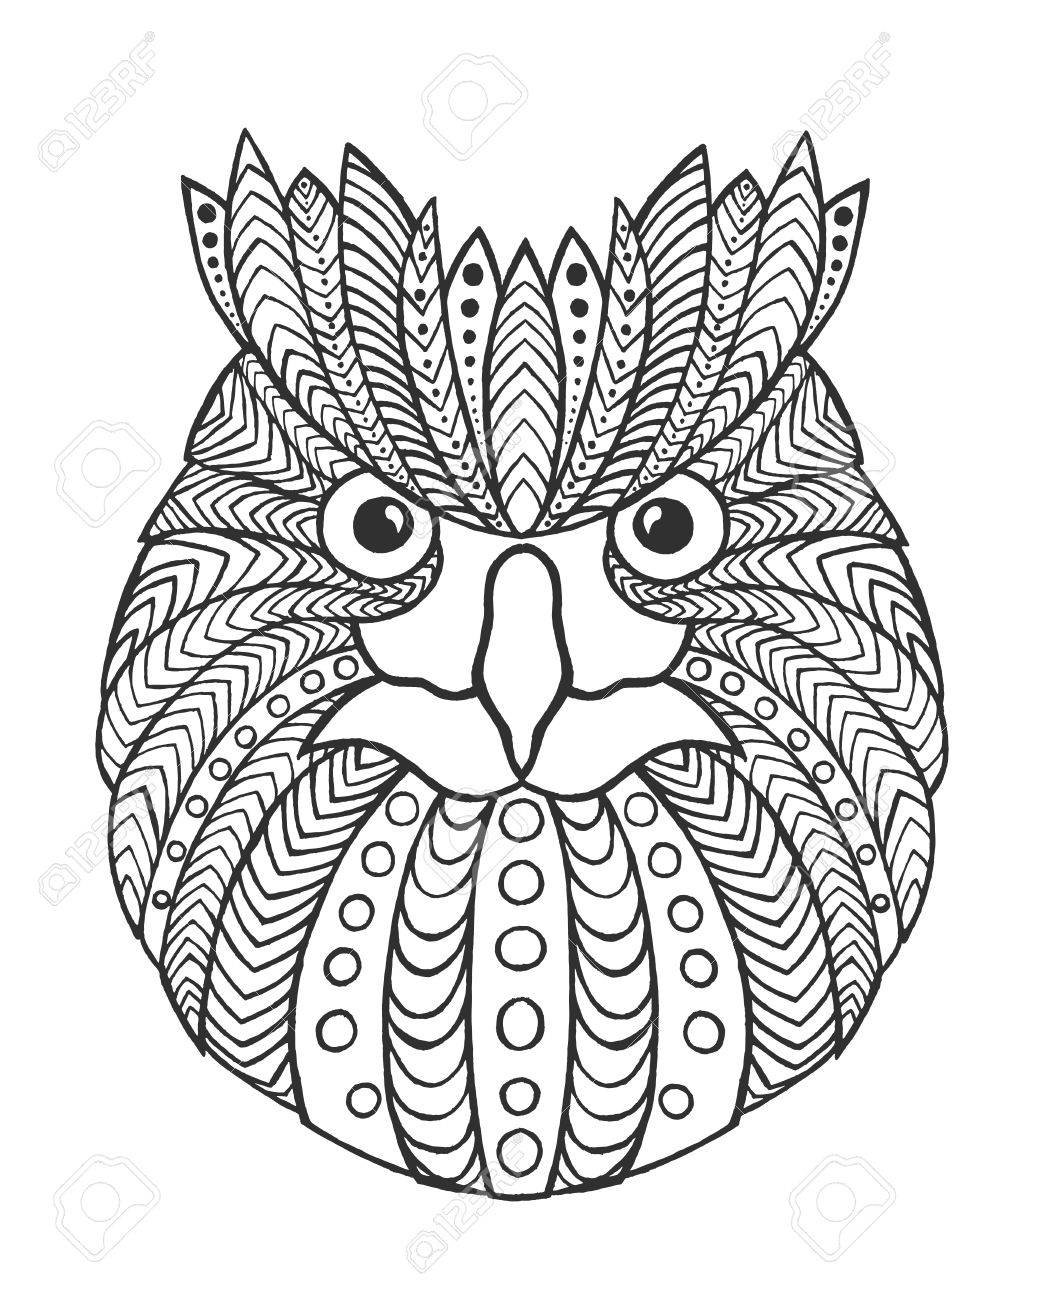 Tribal Owl Drawing at GetDrawings.com | Free for personal use Tribal